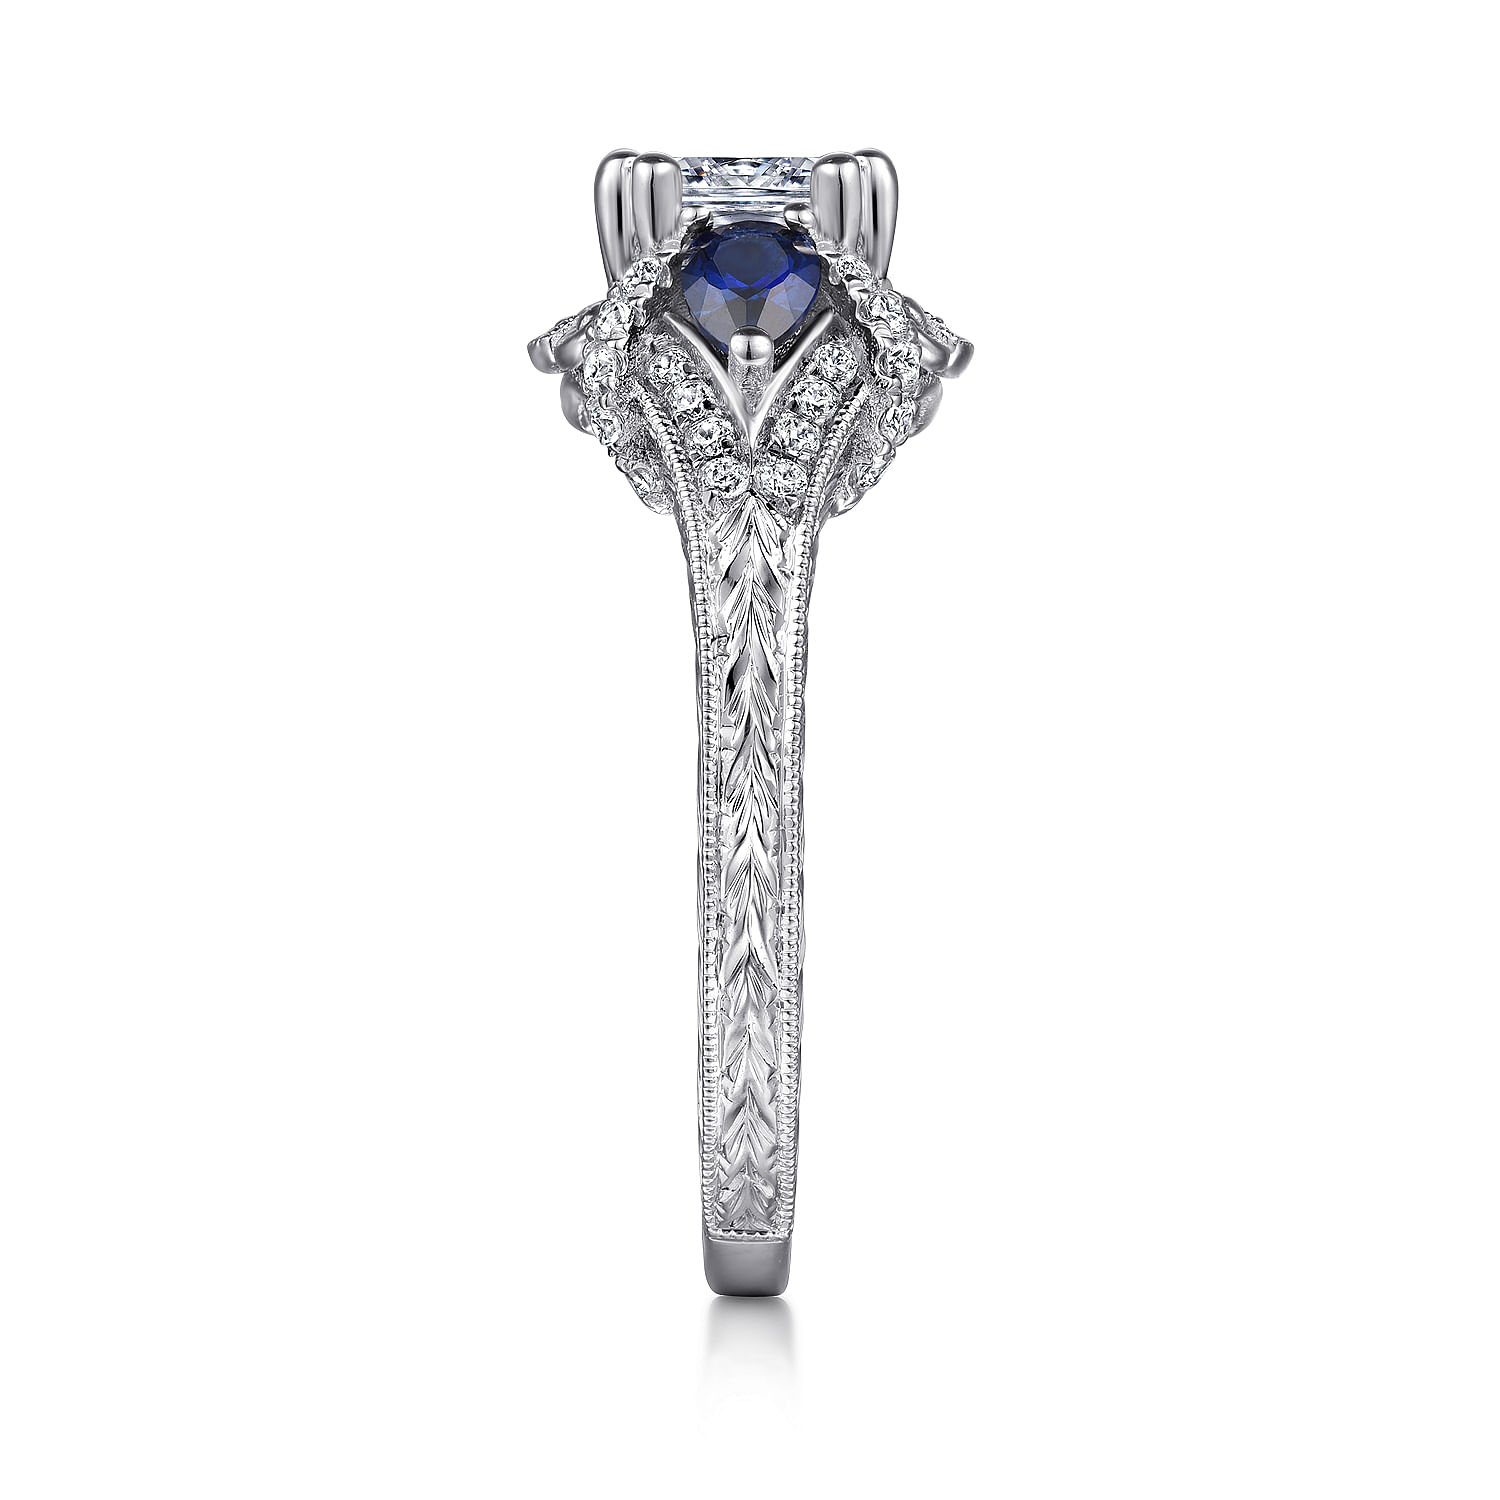 14K White Gold Cushion Cut Sapphire and Diamond Engagement Ring